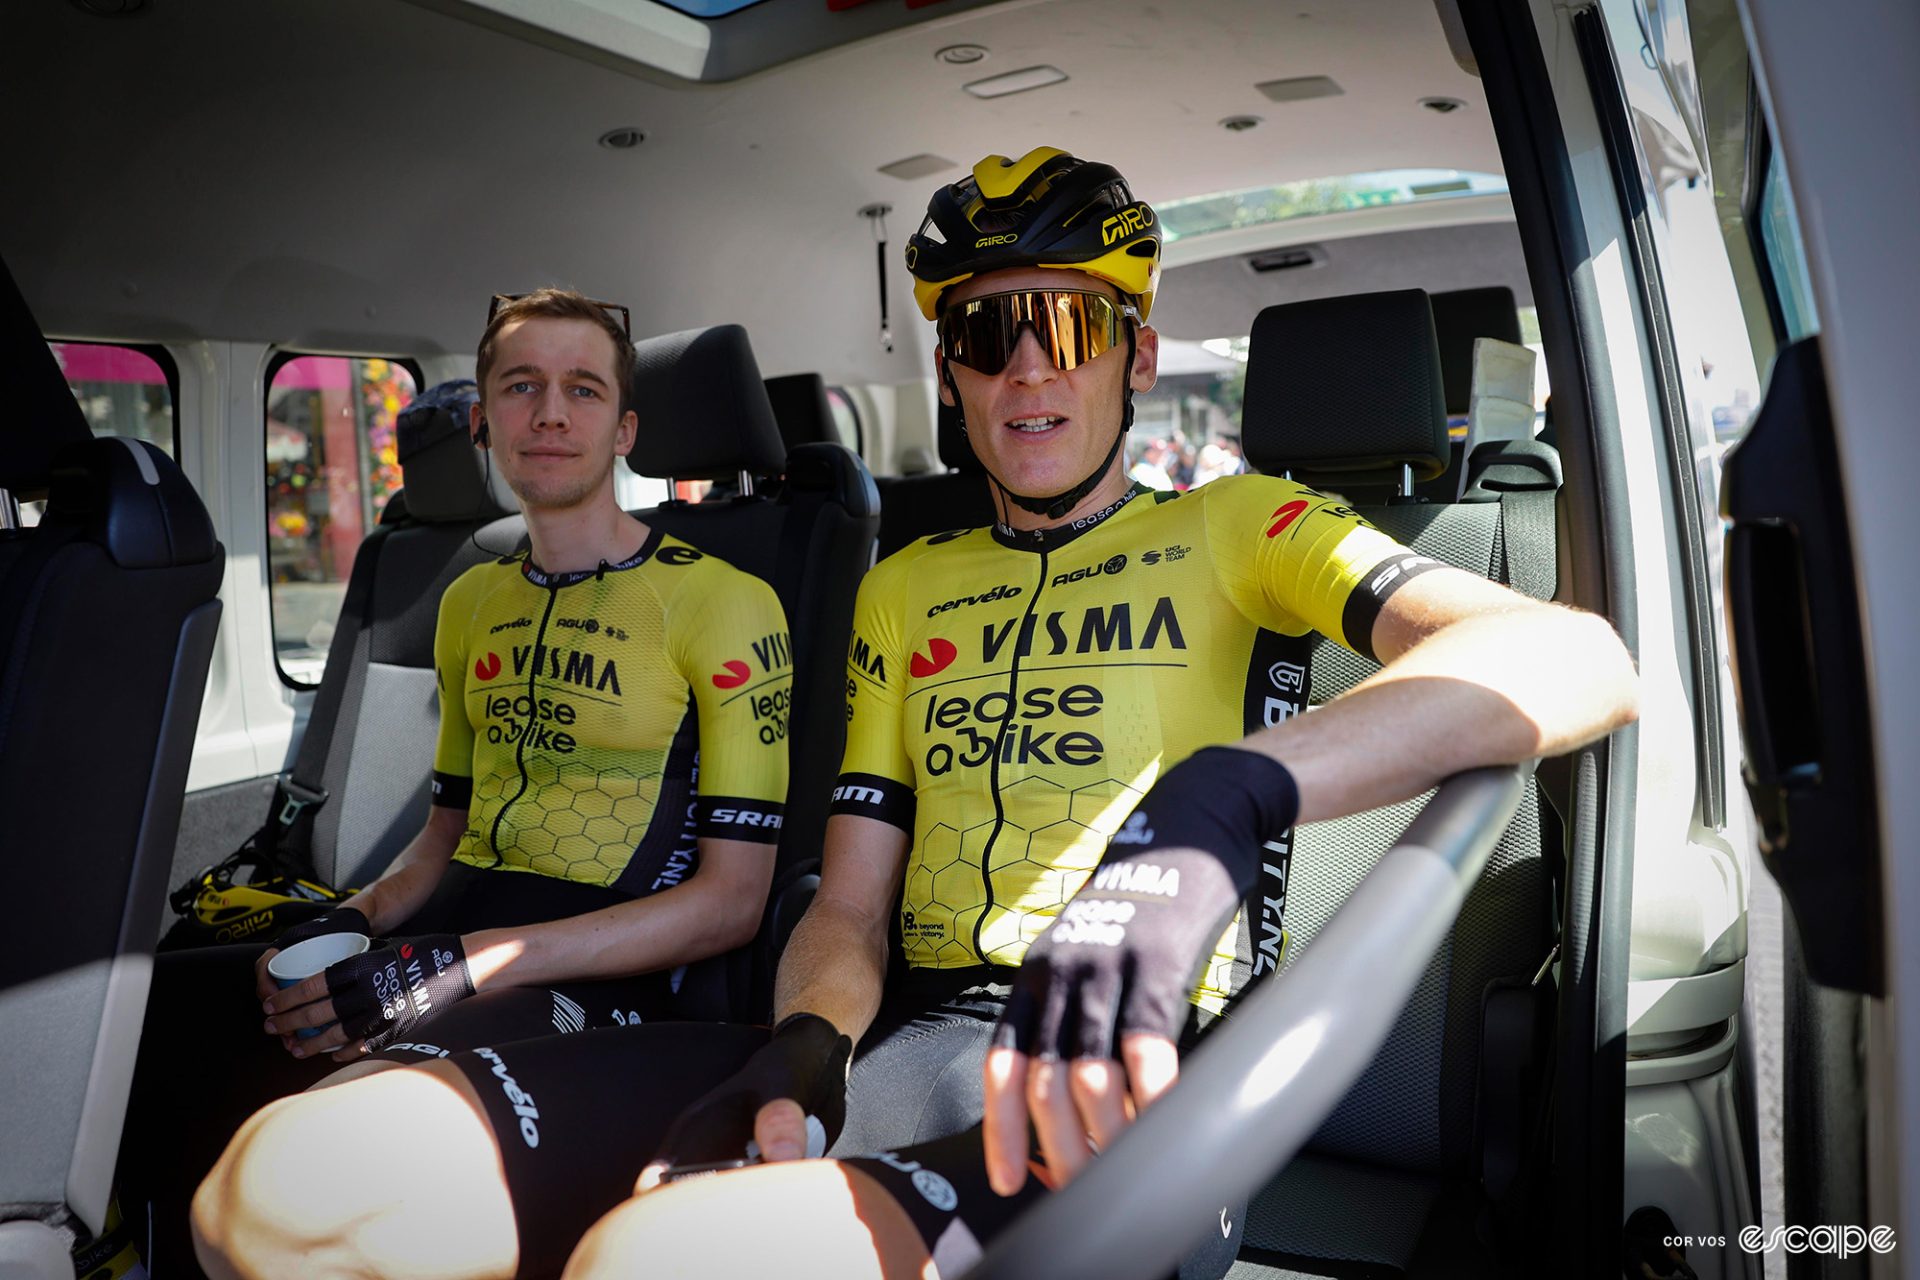 Bart Lemmen sitting next to Robert Gesink in a team bus before the start of a Tour Down Under stage.